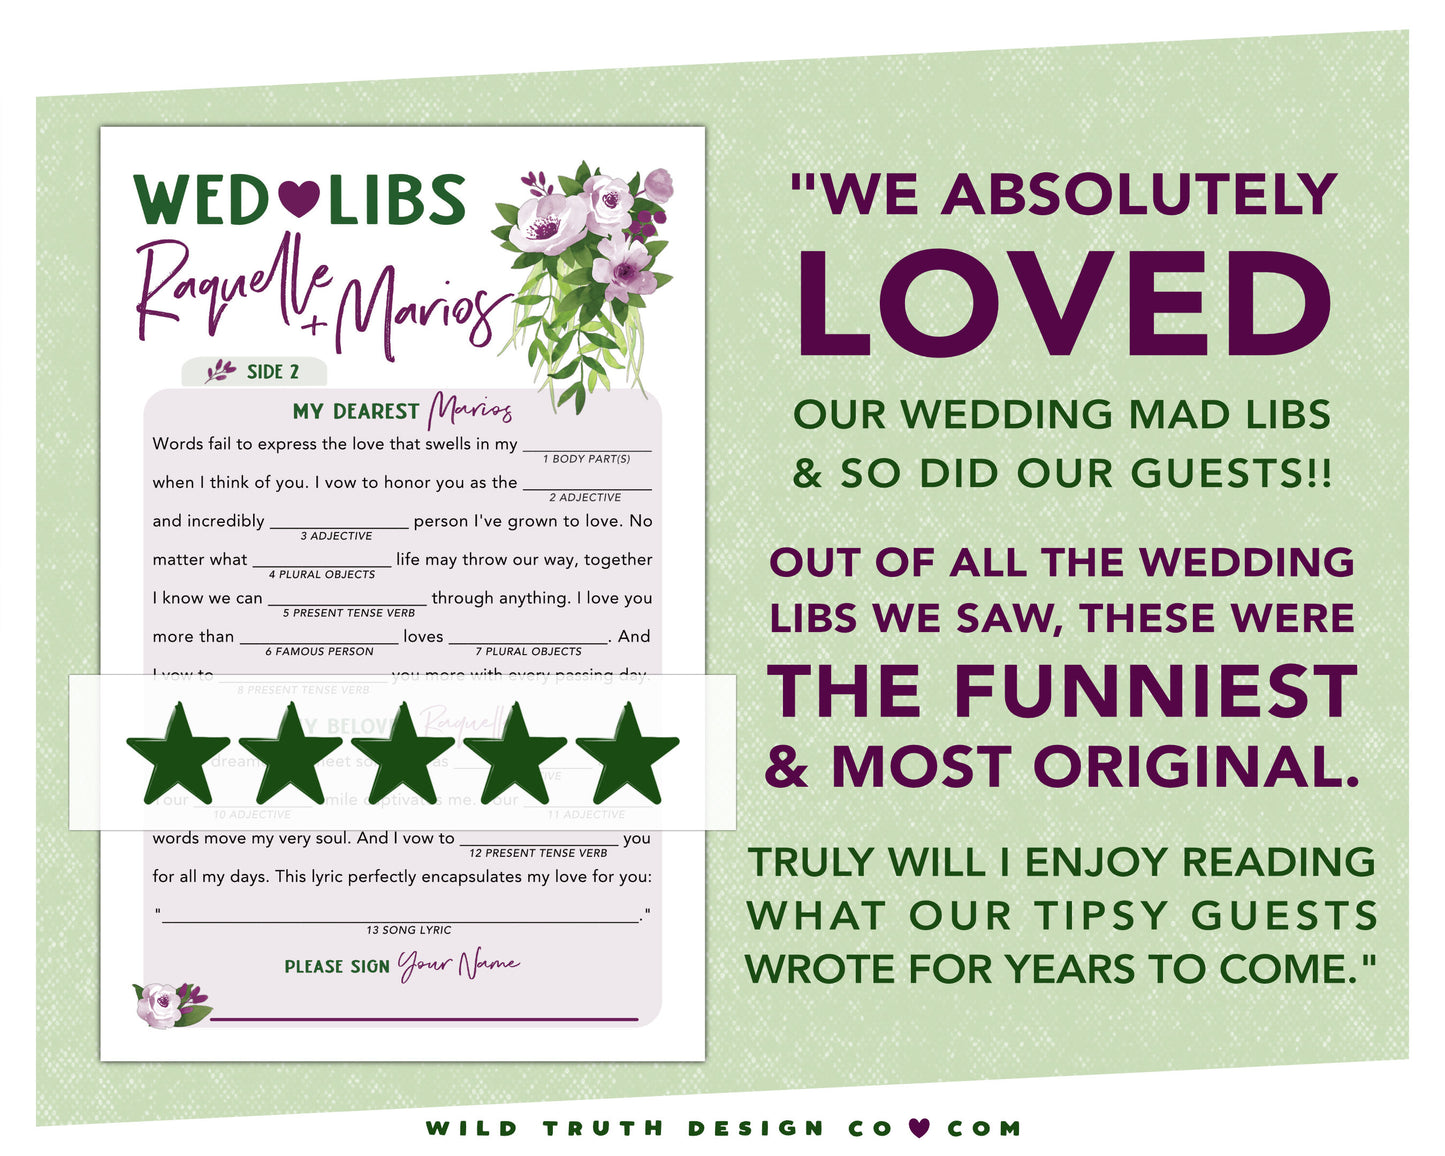 Personalized Wed Libs - Printed Cards - Marriage Vows Madlib Game - Wedding Guest Book - Floral Tropical Plants - Rehearsal Dinner - Engagement Party - Bridal Shower - Reception - Bachelorette - Couples Shower Mad Lib